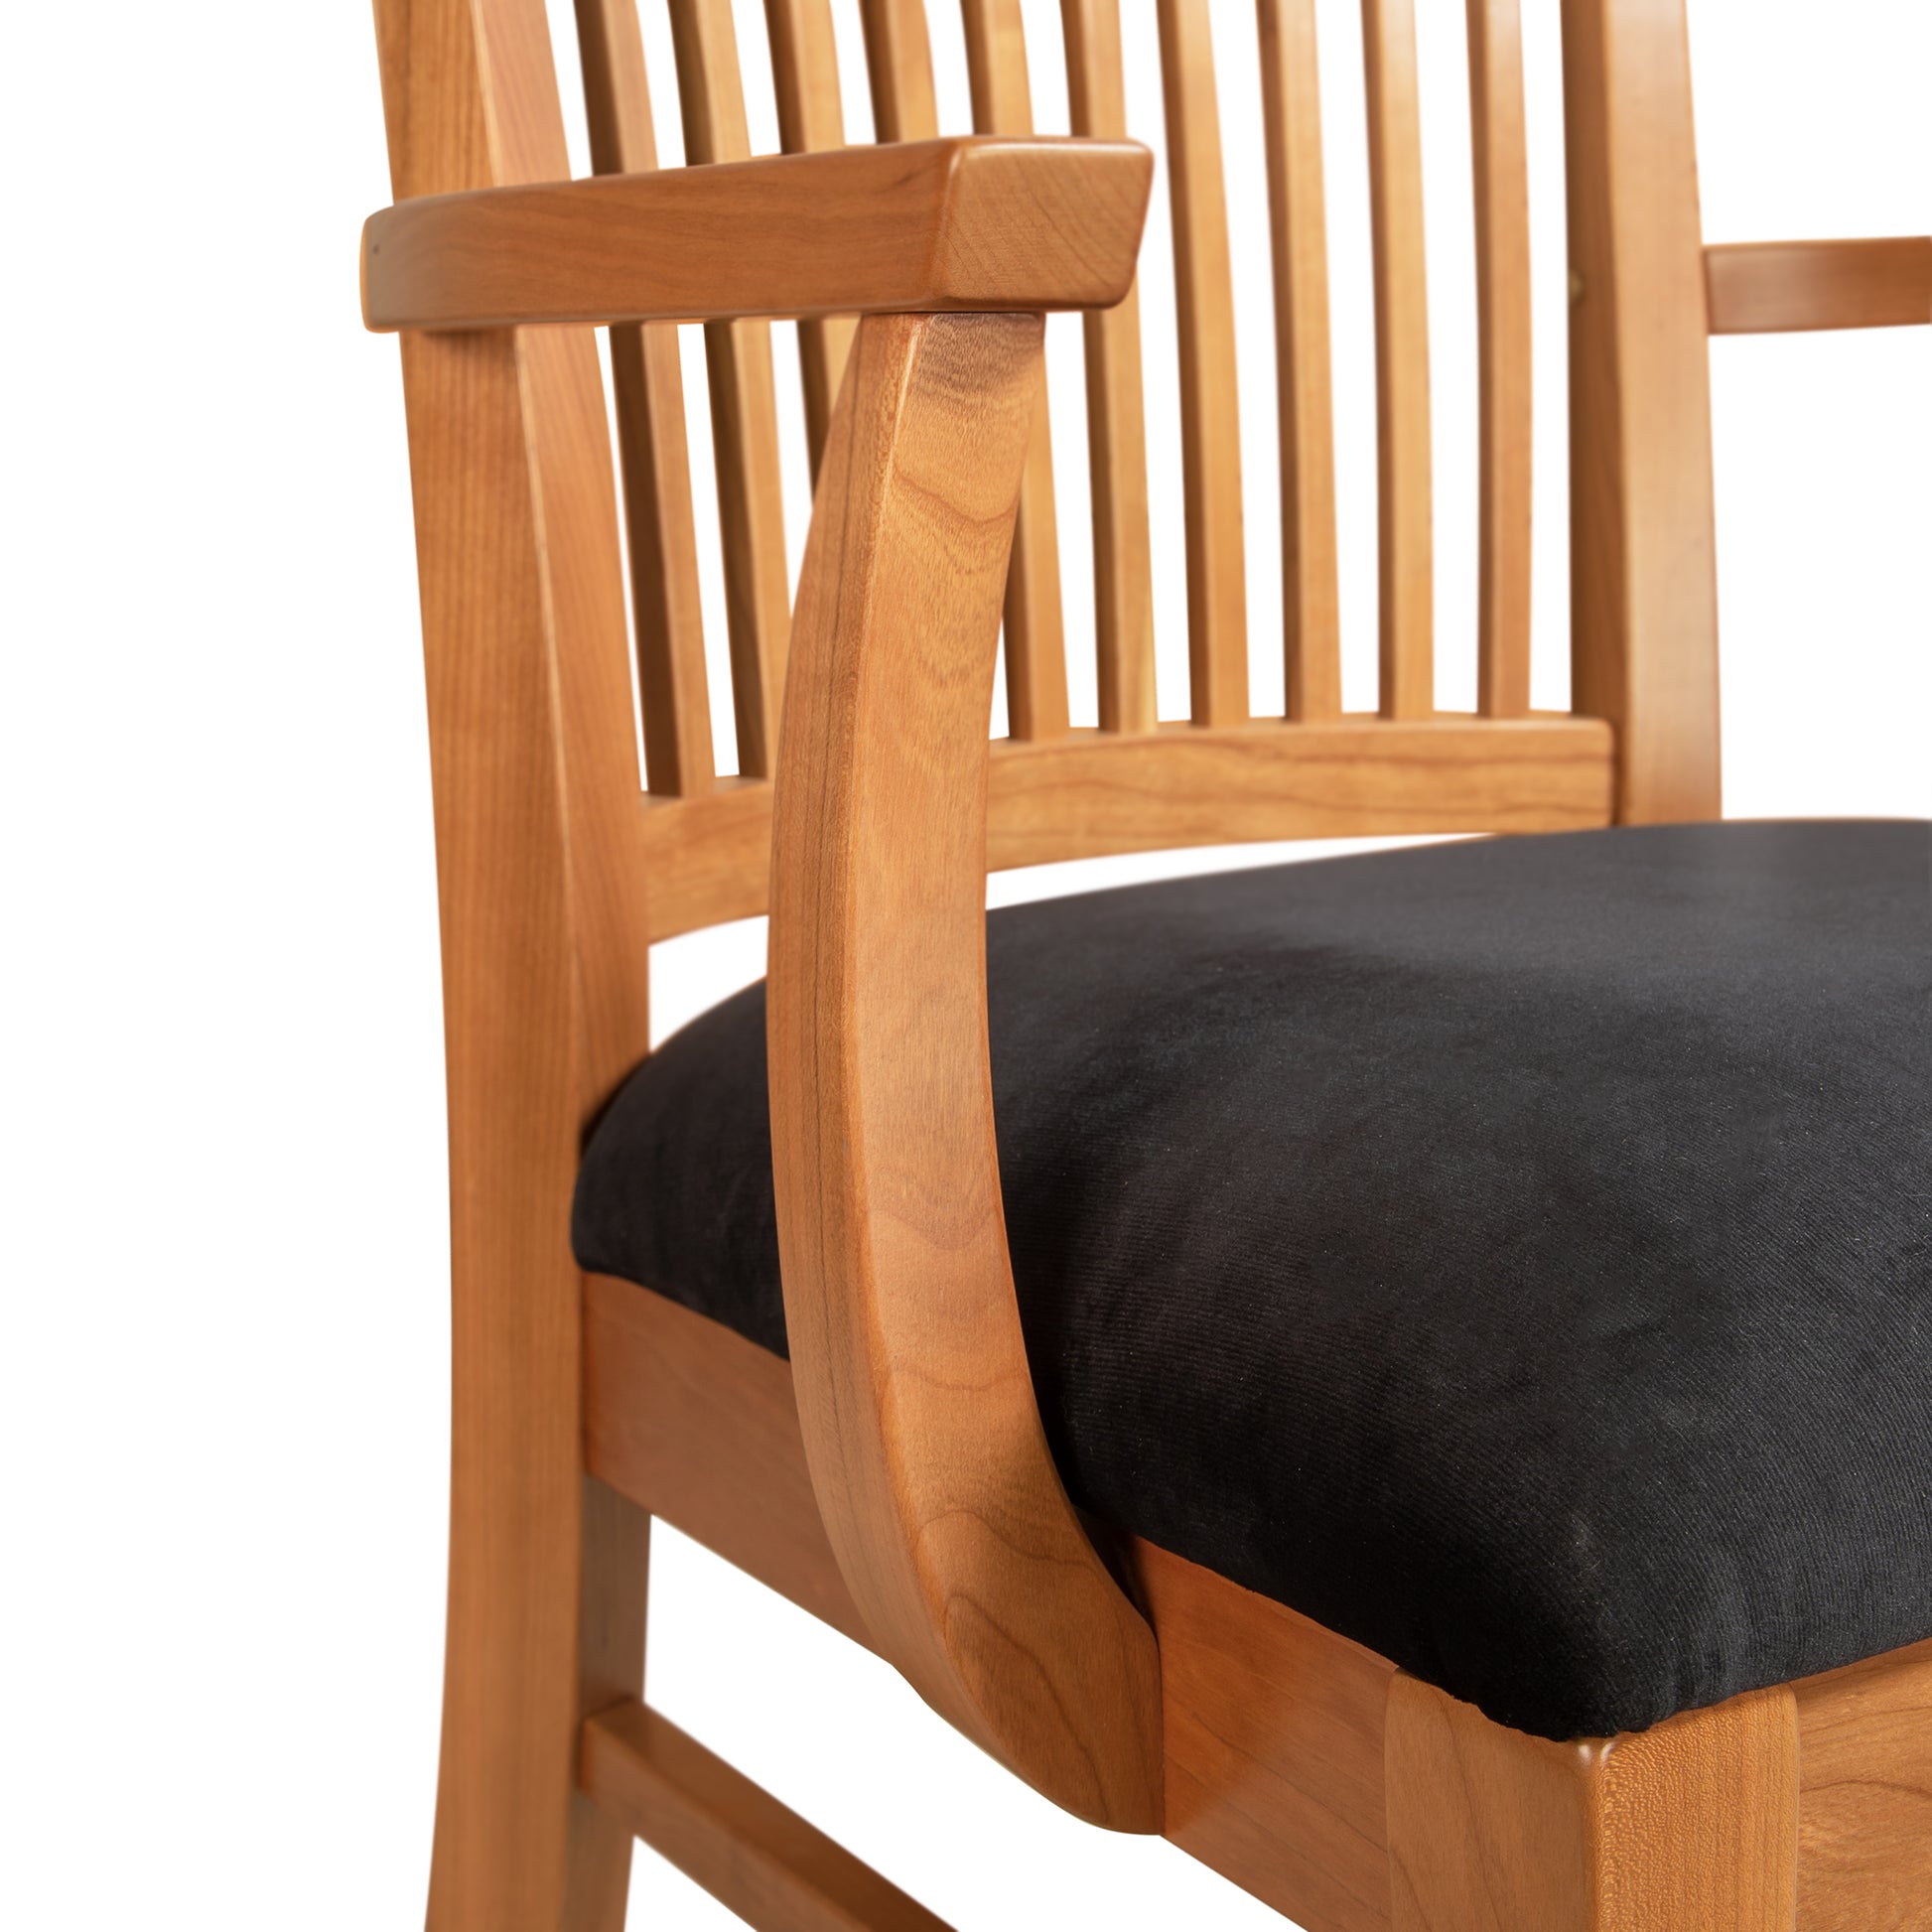 A close-up view of a Vermont Woods Studios Contemporary Shaker Chair with a black cushioned seat, highlighting the smooth finish and grain details of the wood.